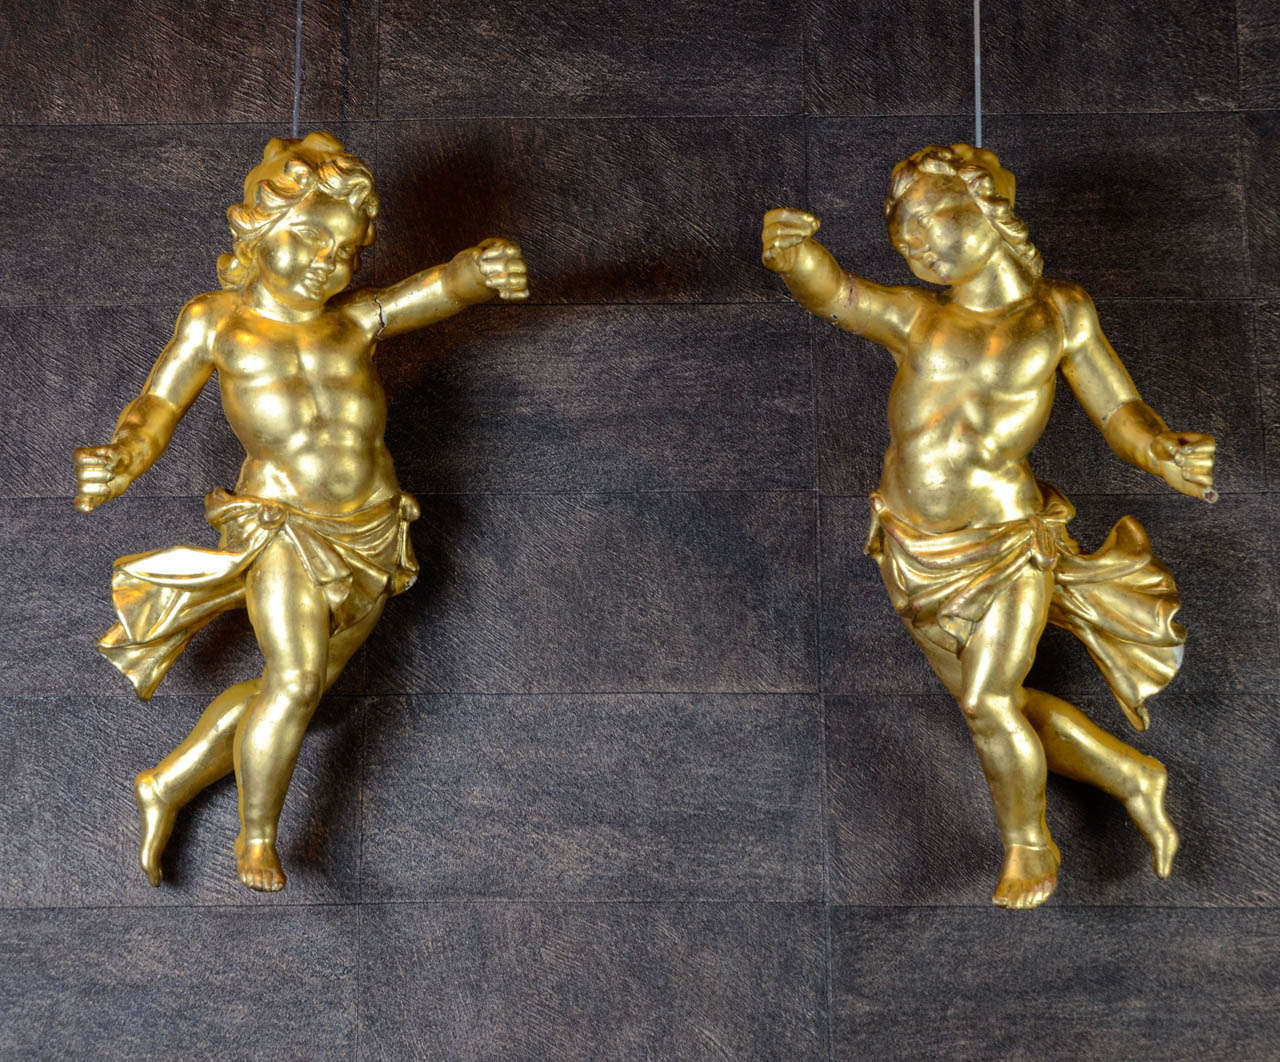 A pair of 18th century Italian hand gilded and carved figures of angels.
They could be suspended from a ceiling with each retaining its mounting hardware at the back,
Italy, Florence.